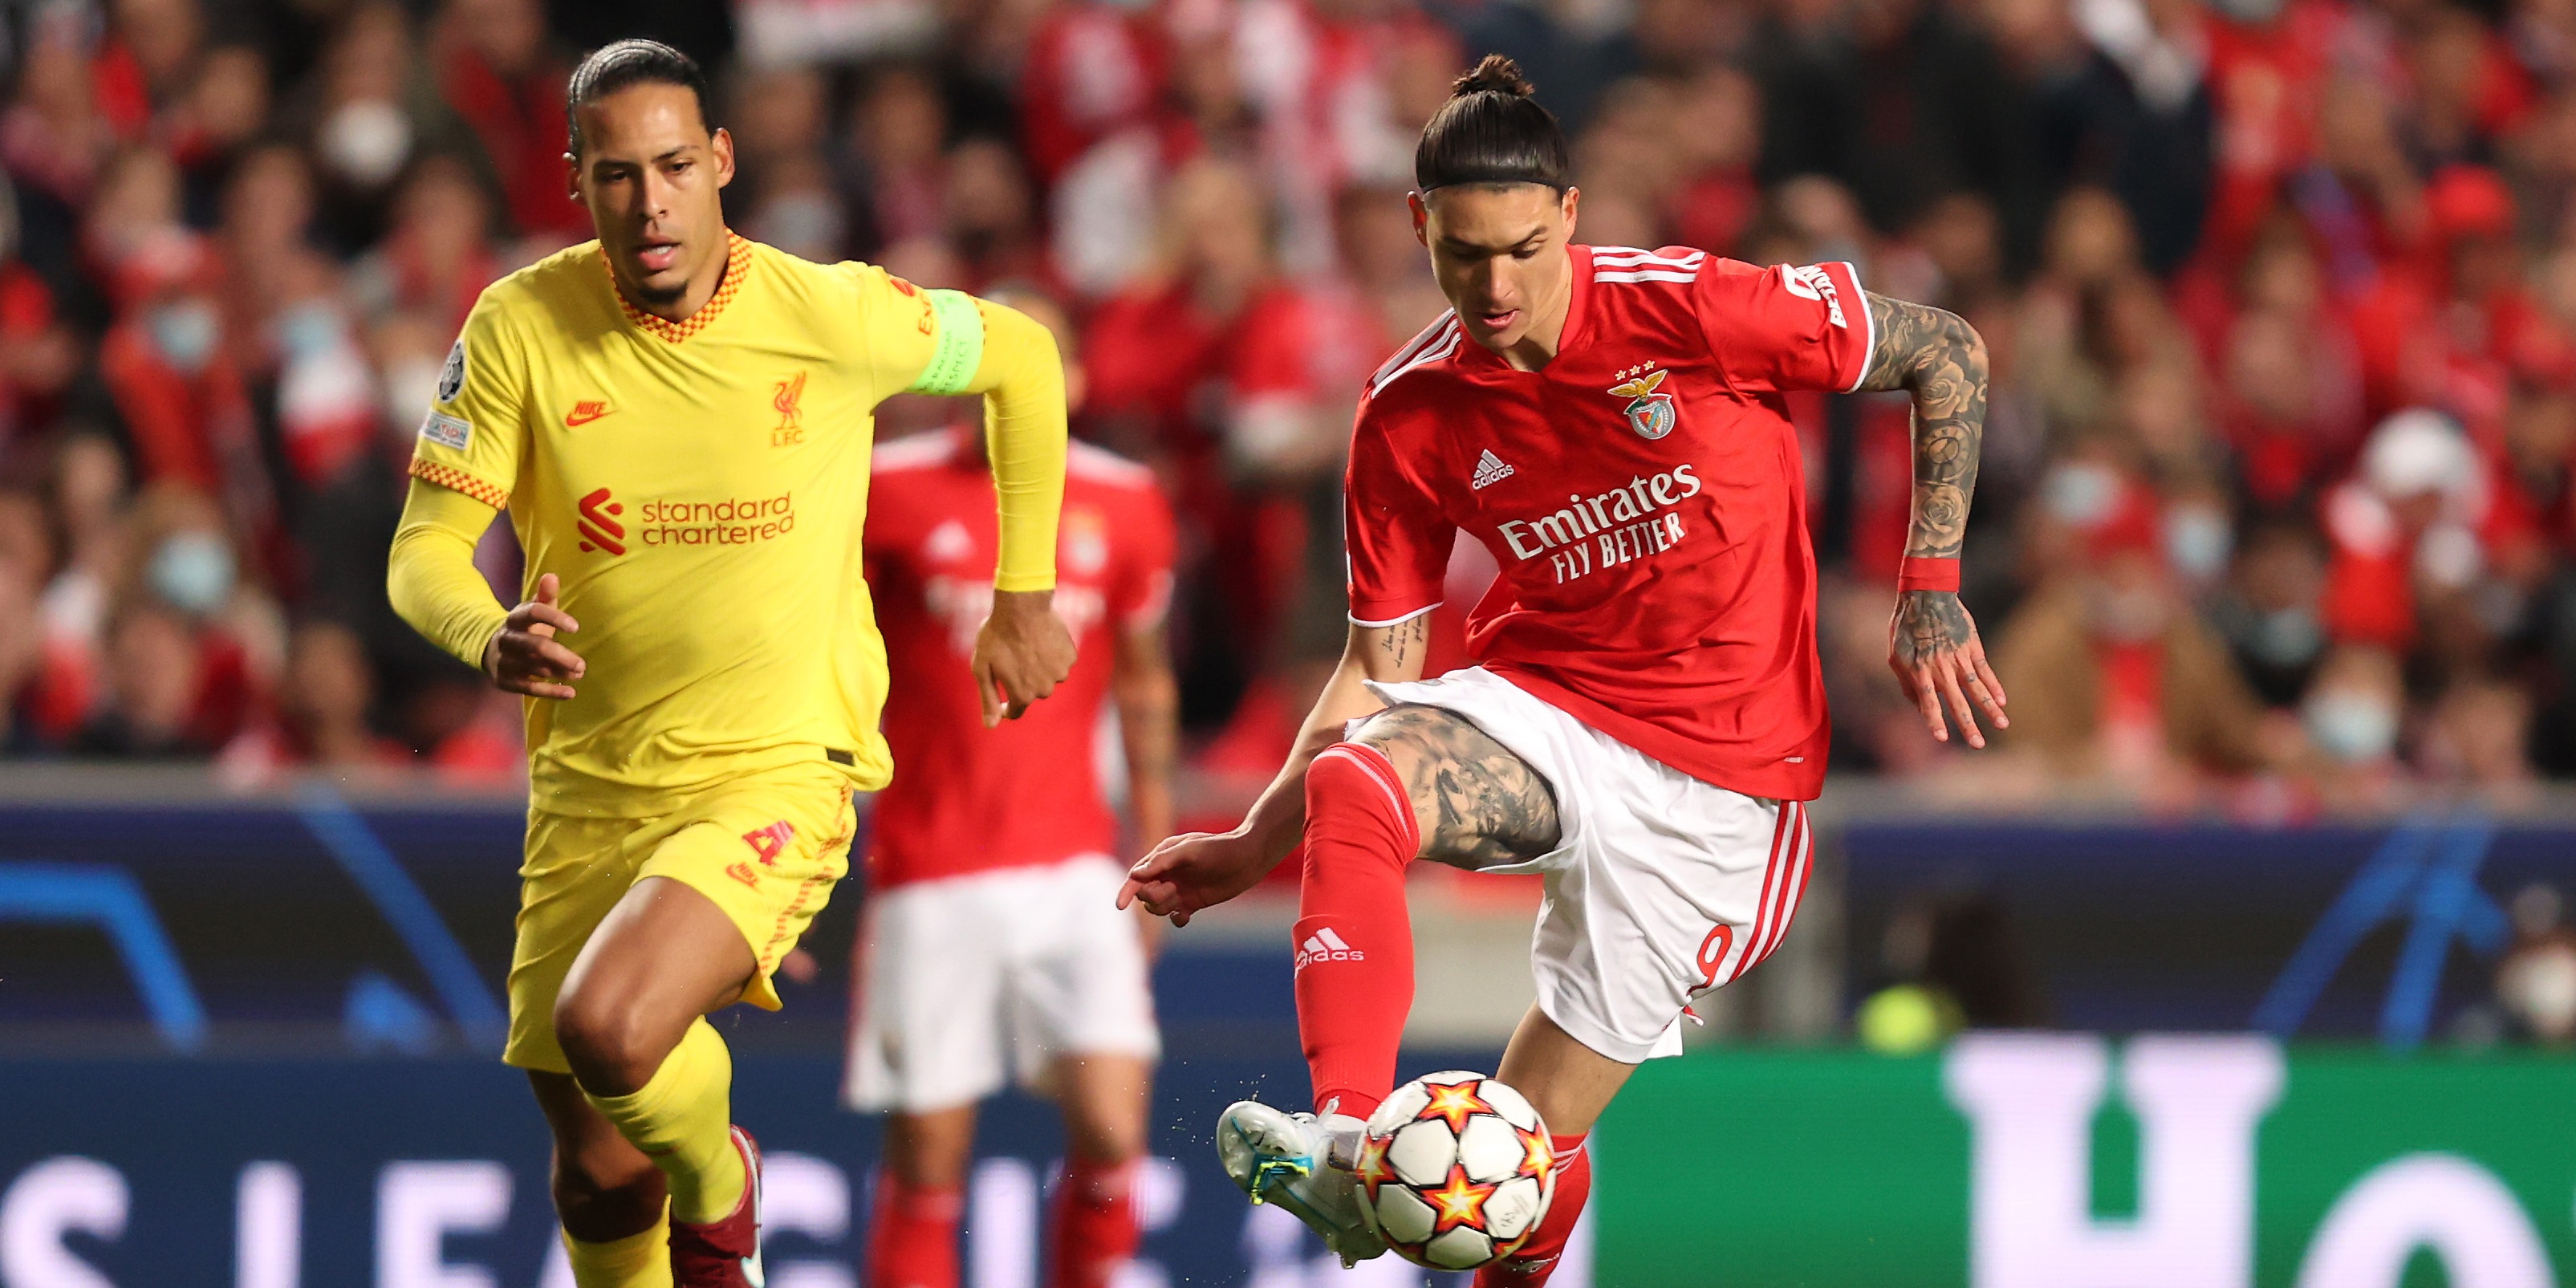 Liverpool team news confirmed: Van Dijk benched as Klopp makes three changes to backline